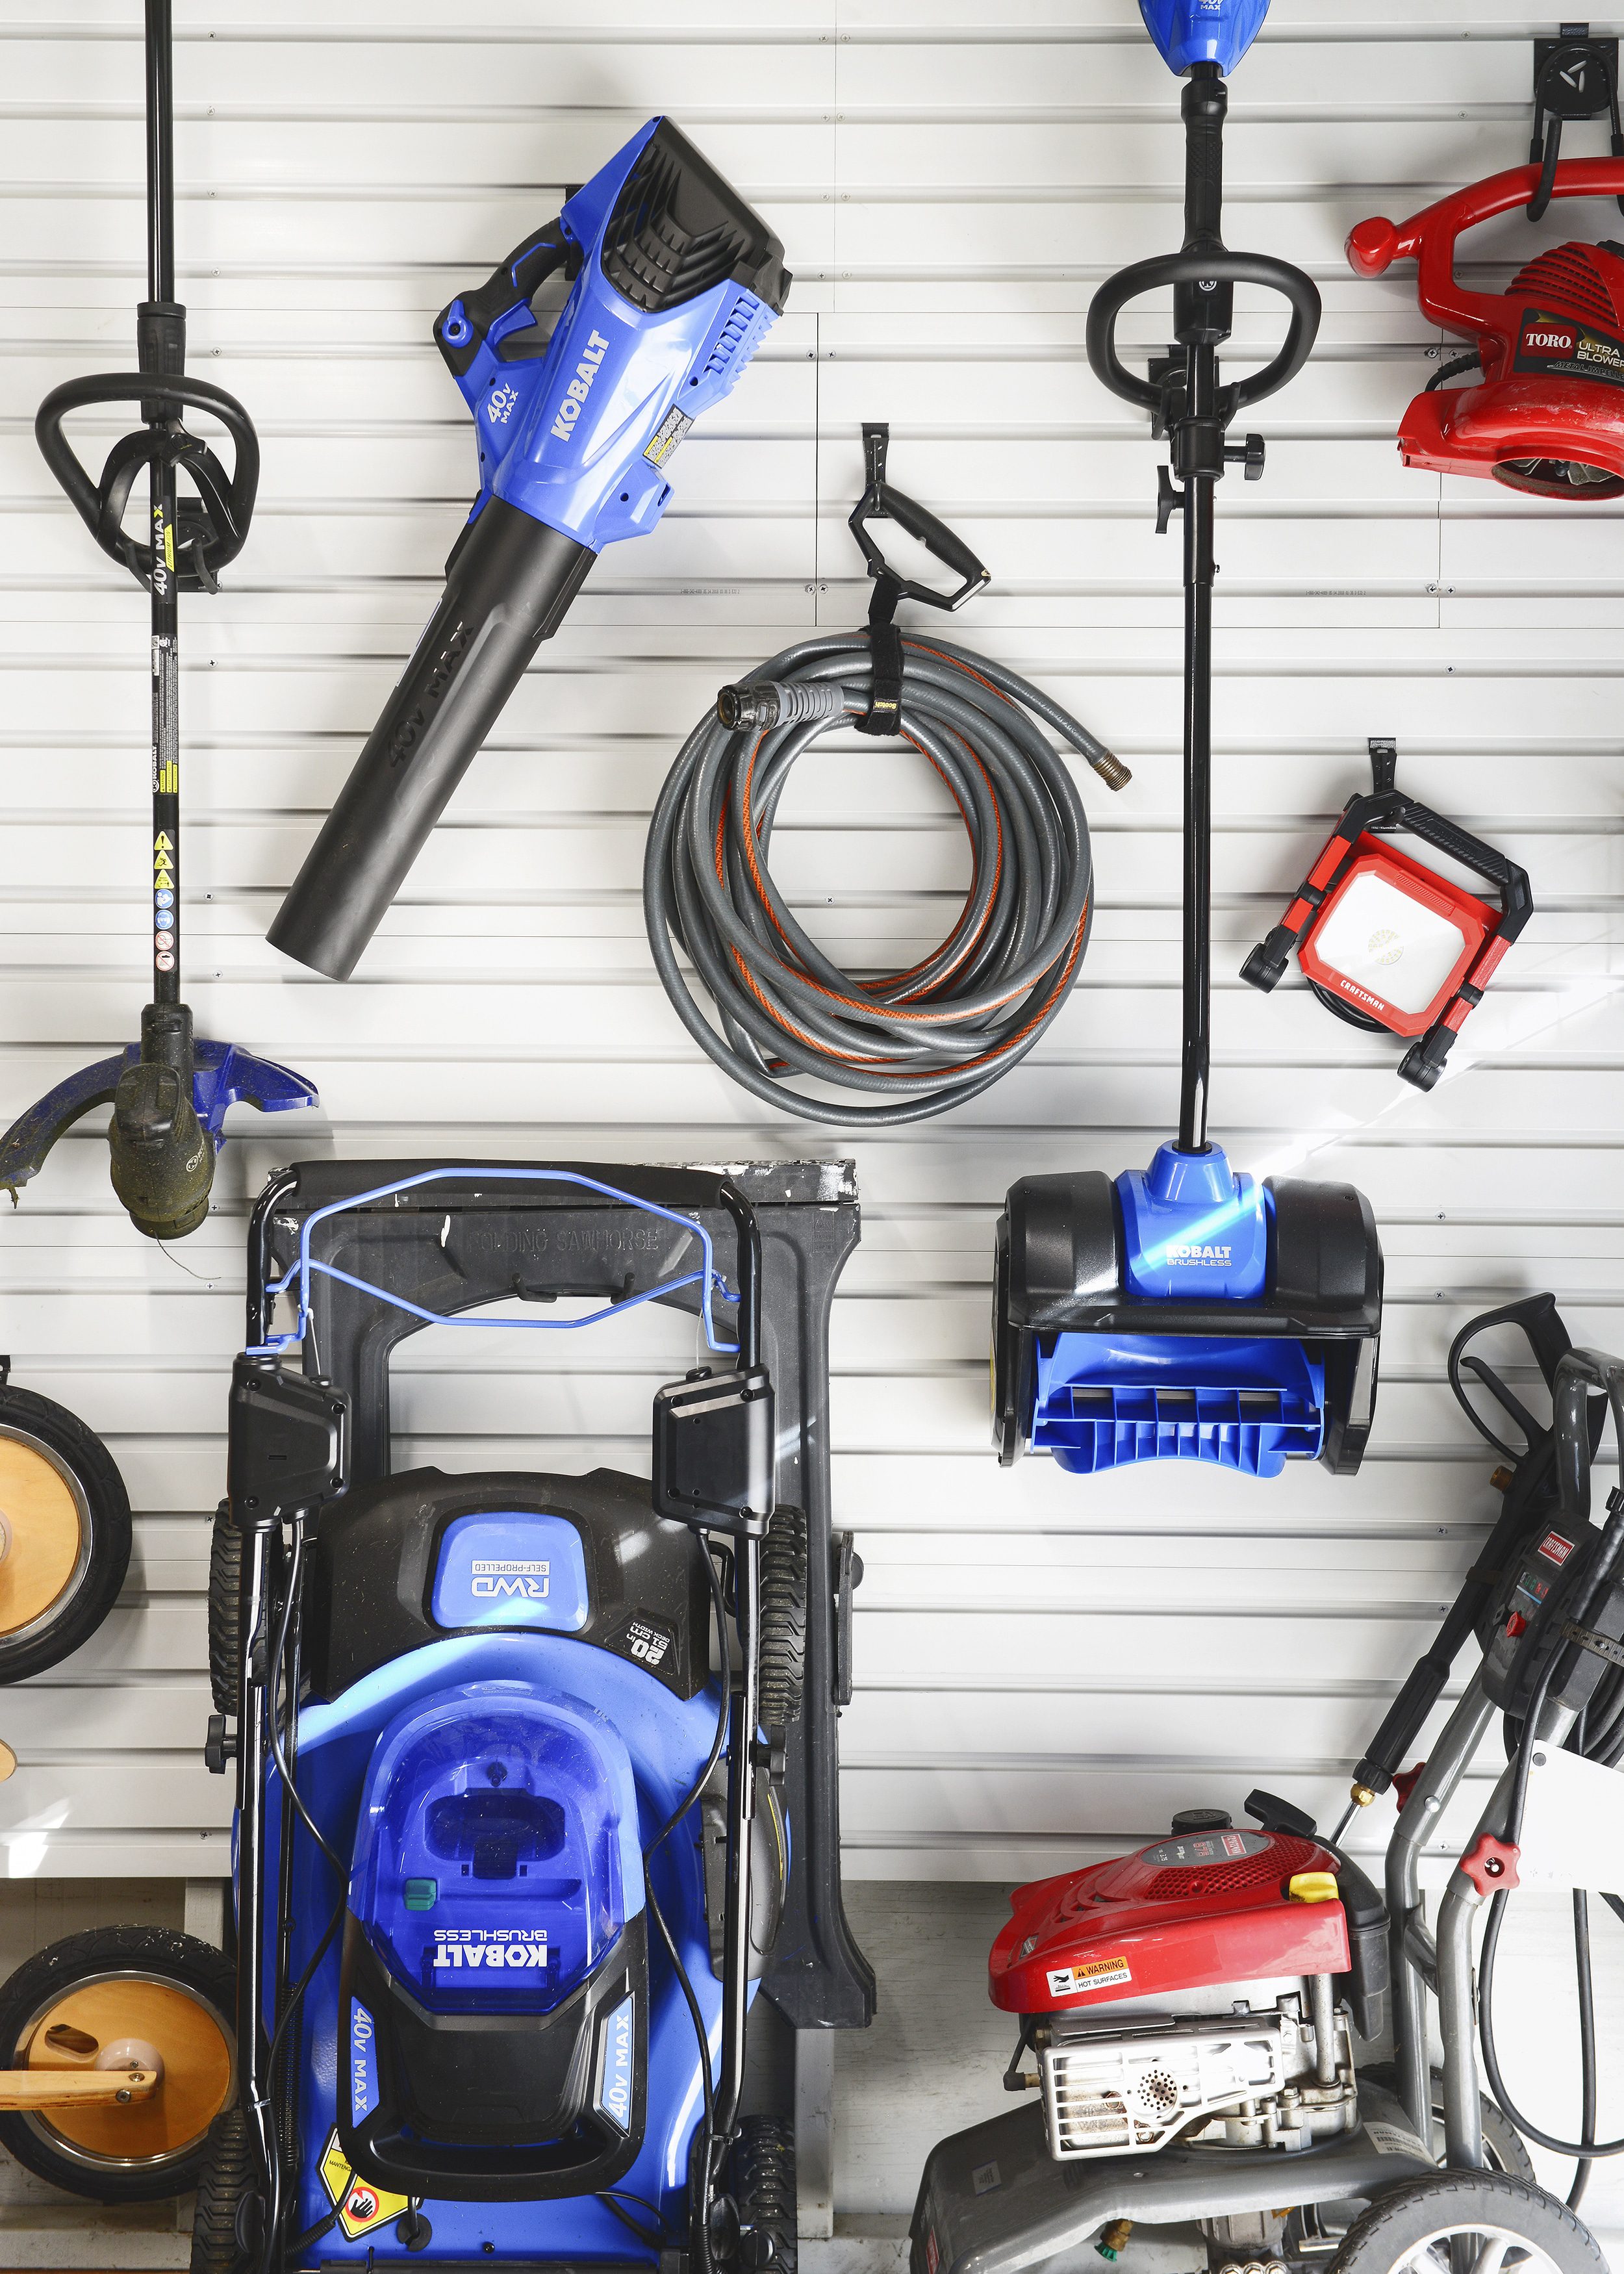 A wall of Gladiator Gear Wall with tools hanging from it // 7 Garage Organization Tips Before Winter Hits! via Yellow Brick Home with Lowe's Home Improvement #lowespartner